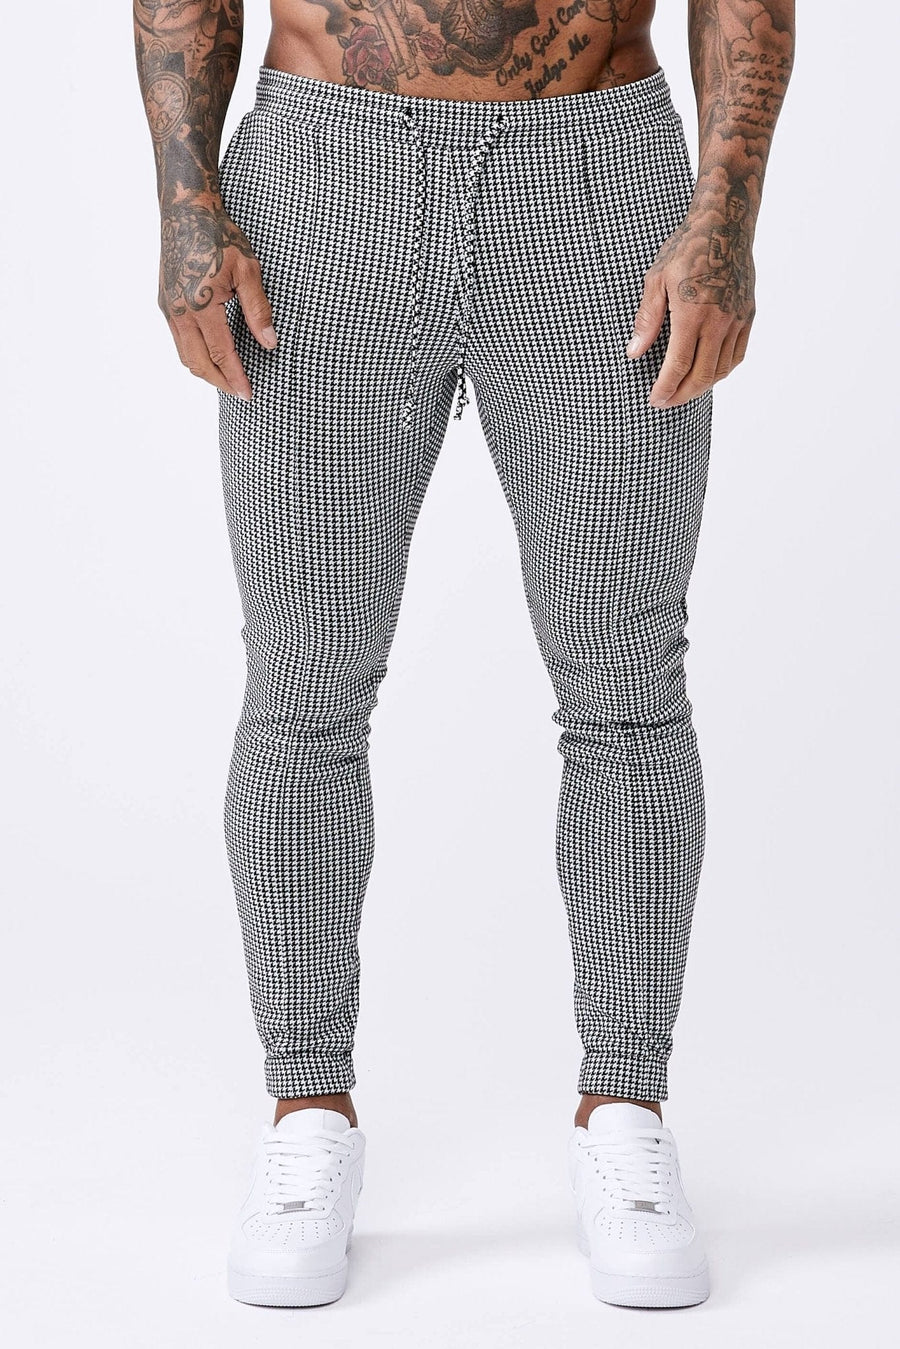 Legend London Trousers HOUNDSTOOTH CHECK CUFFED TROUSER - BLACK & WHITE